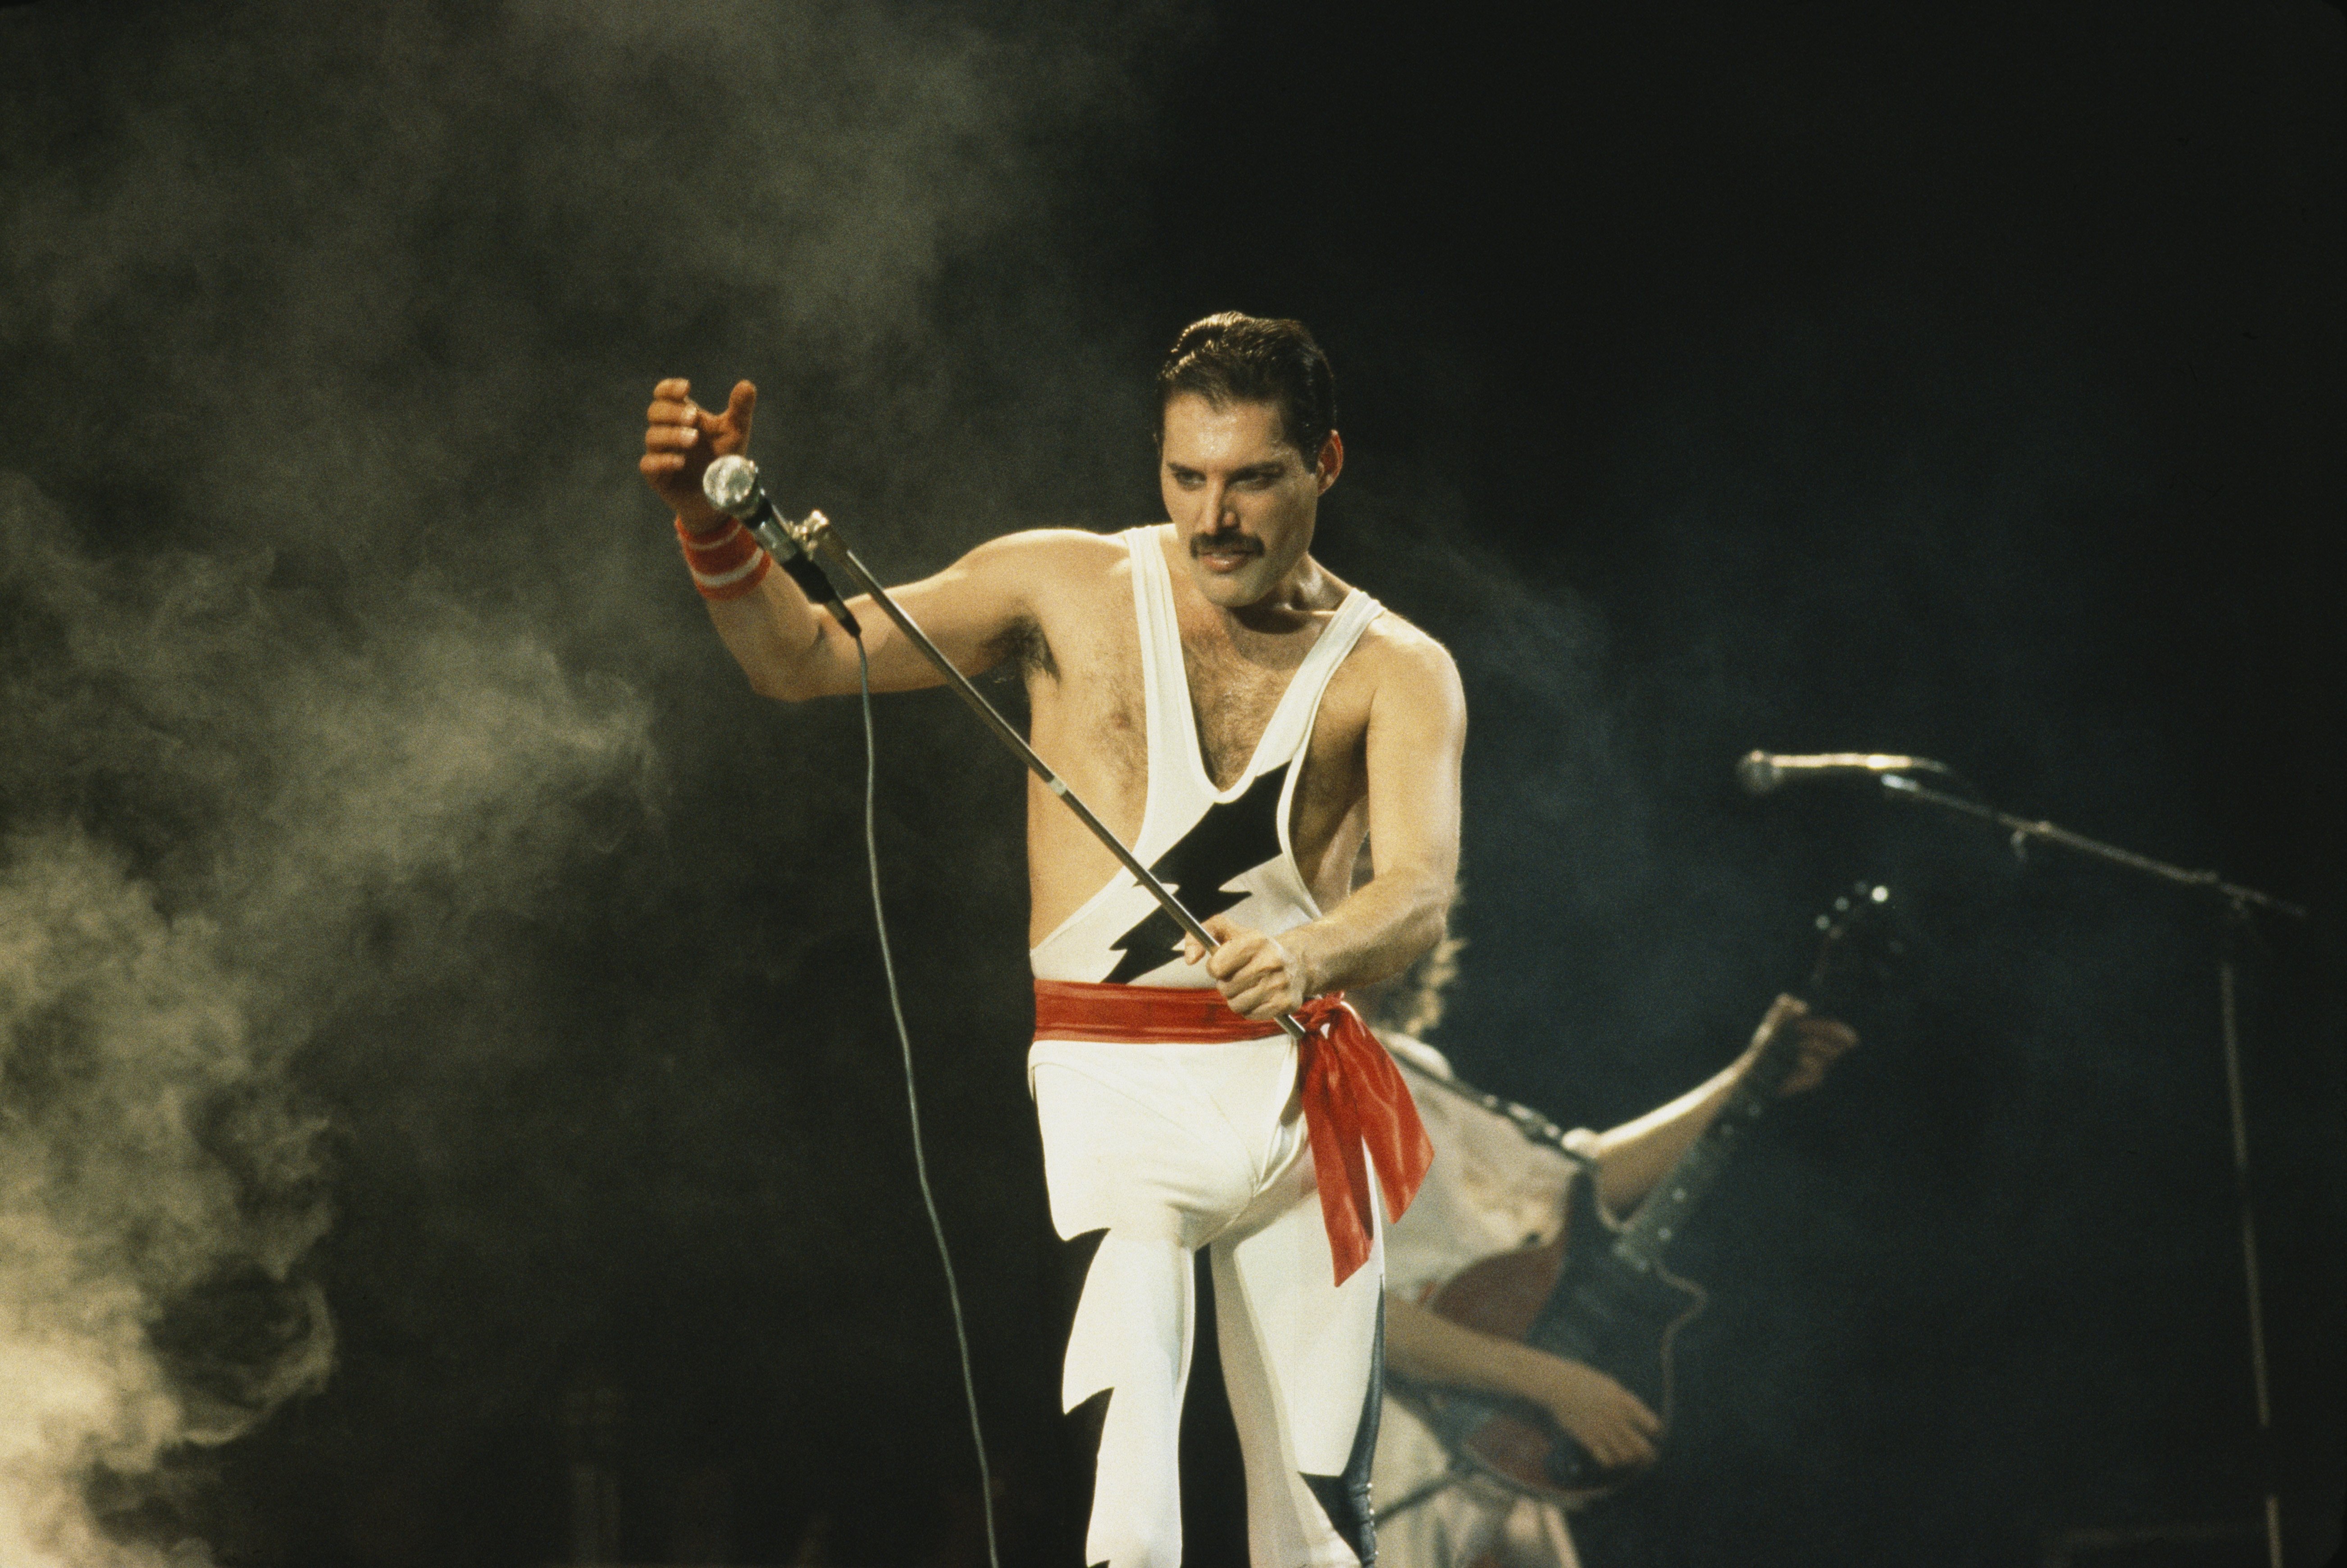 Freddie Mercury performing on stage with British rock group Queen, 1985 | Photo: GettyImages